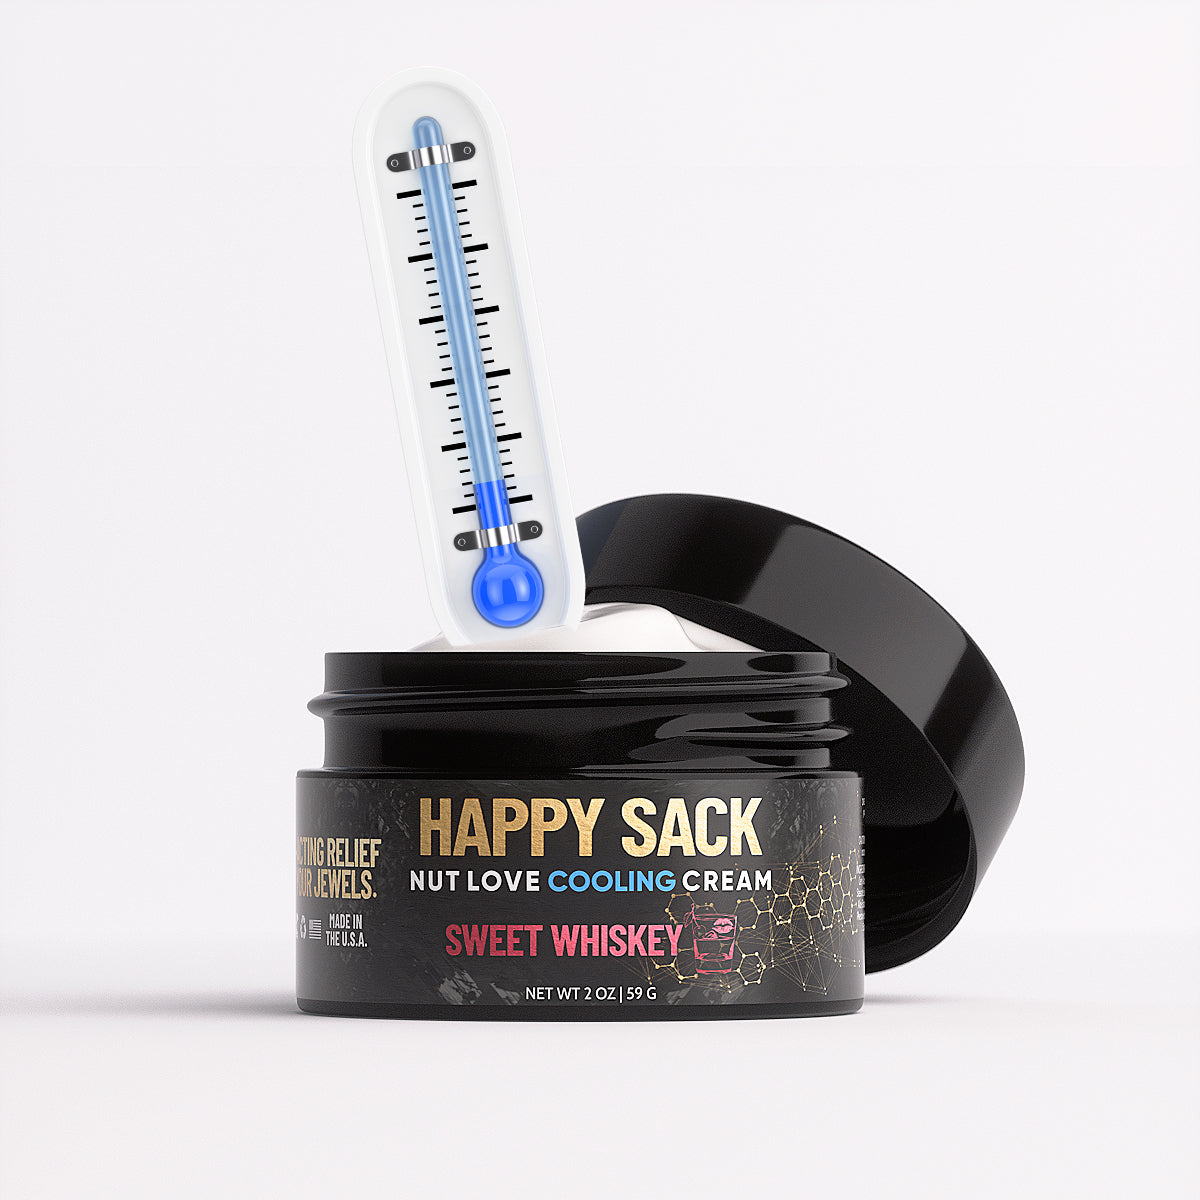 Happy Sack Nut Love Cooling Ball Cream- Sweet Whiskey Derm Dude